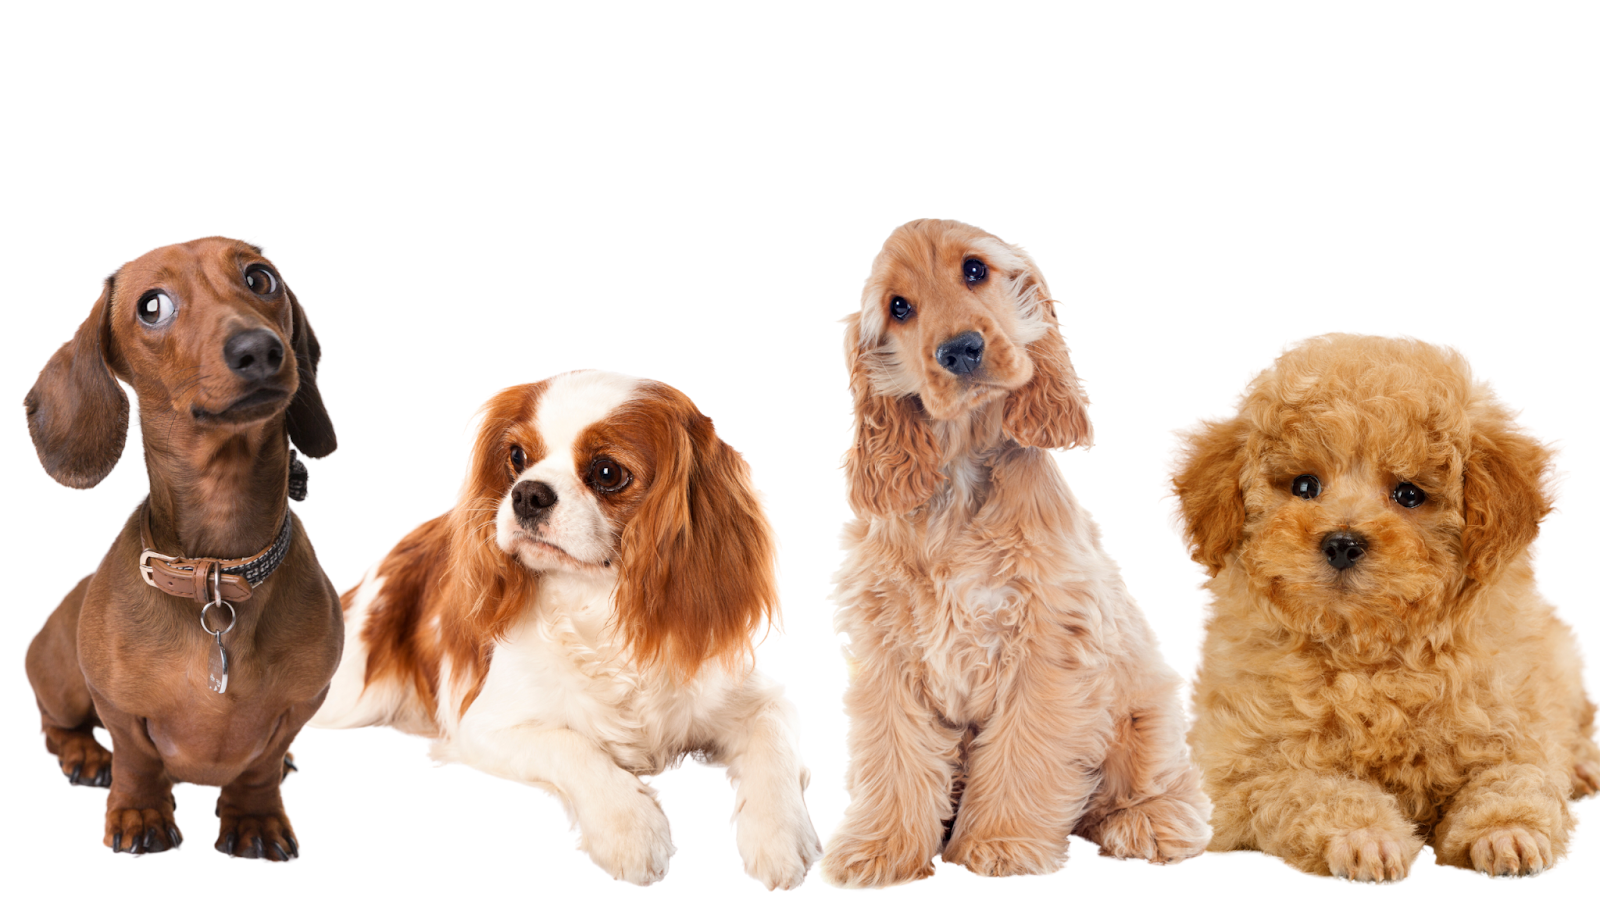 Certain breeds, such as miniature poodles, cocker spaniels and others are more prone to heart problems. 